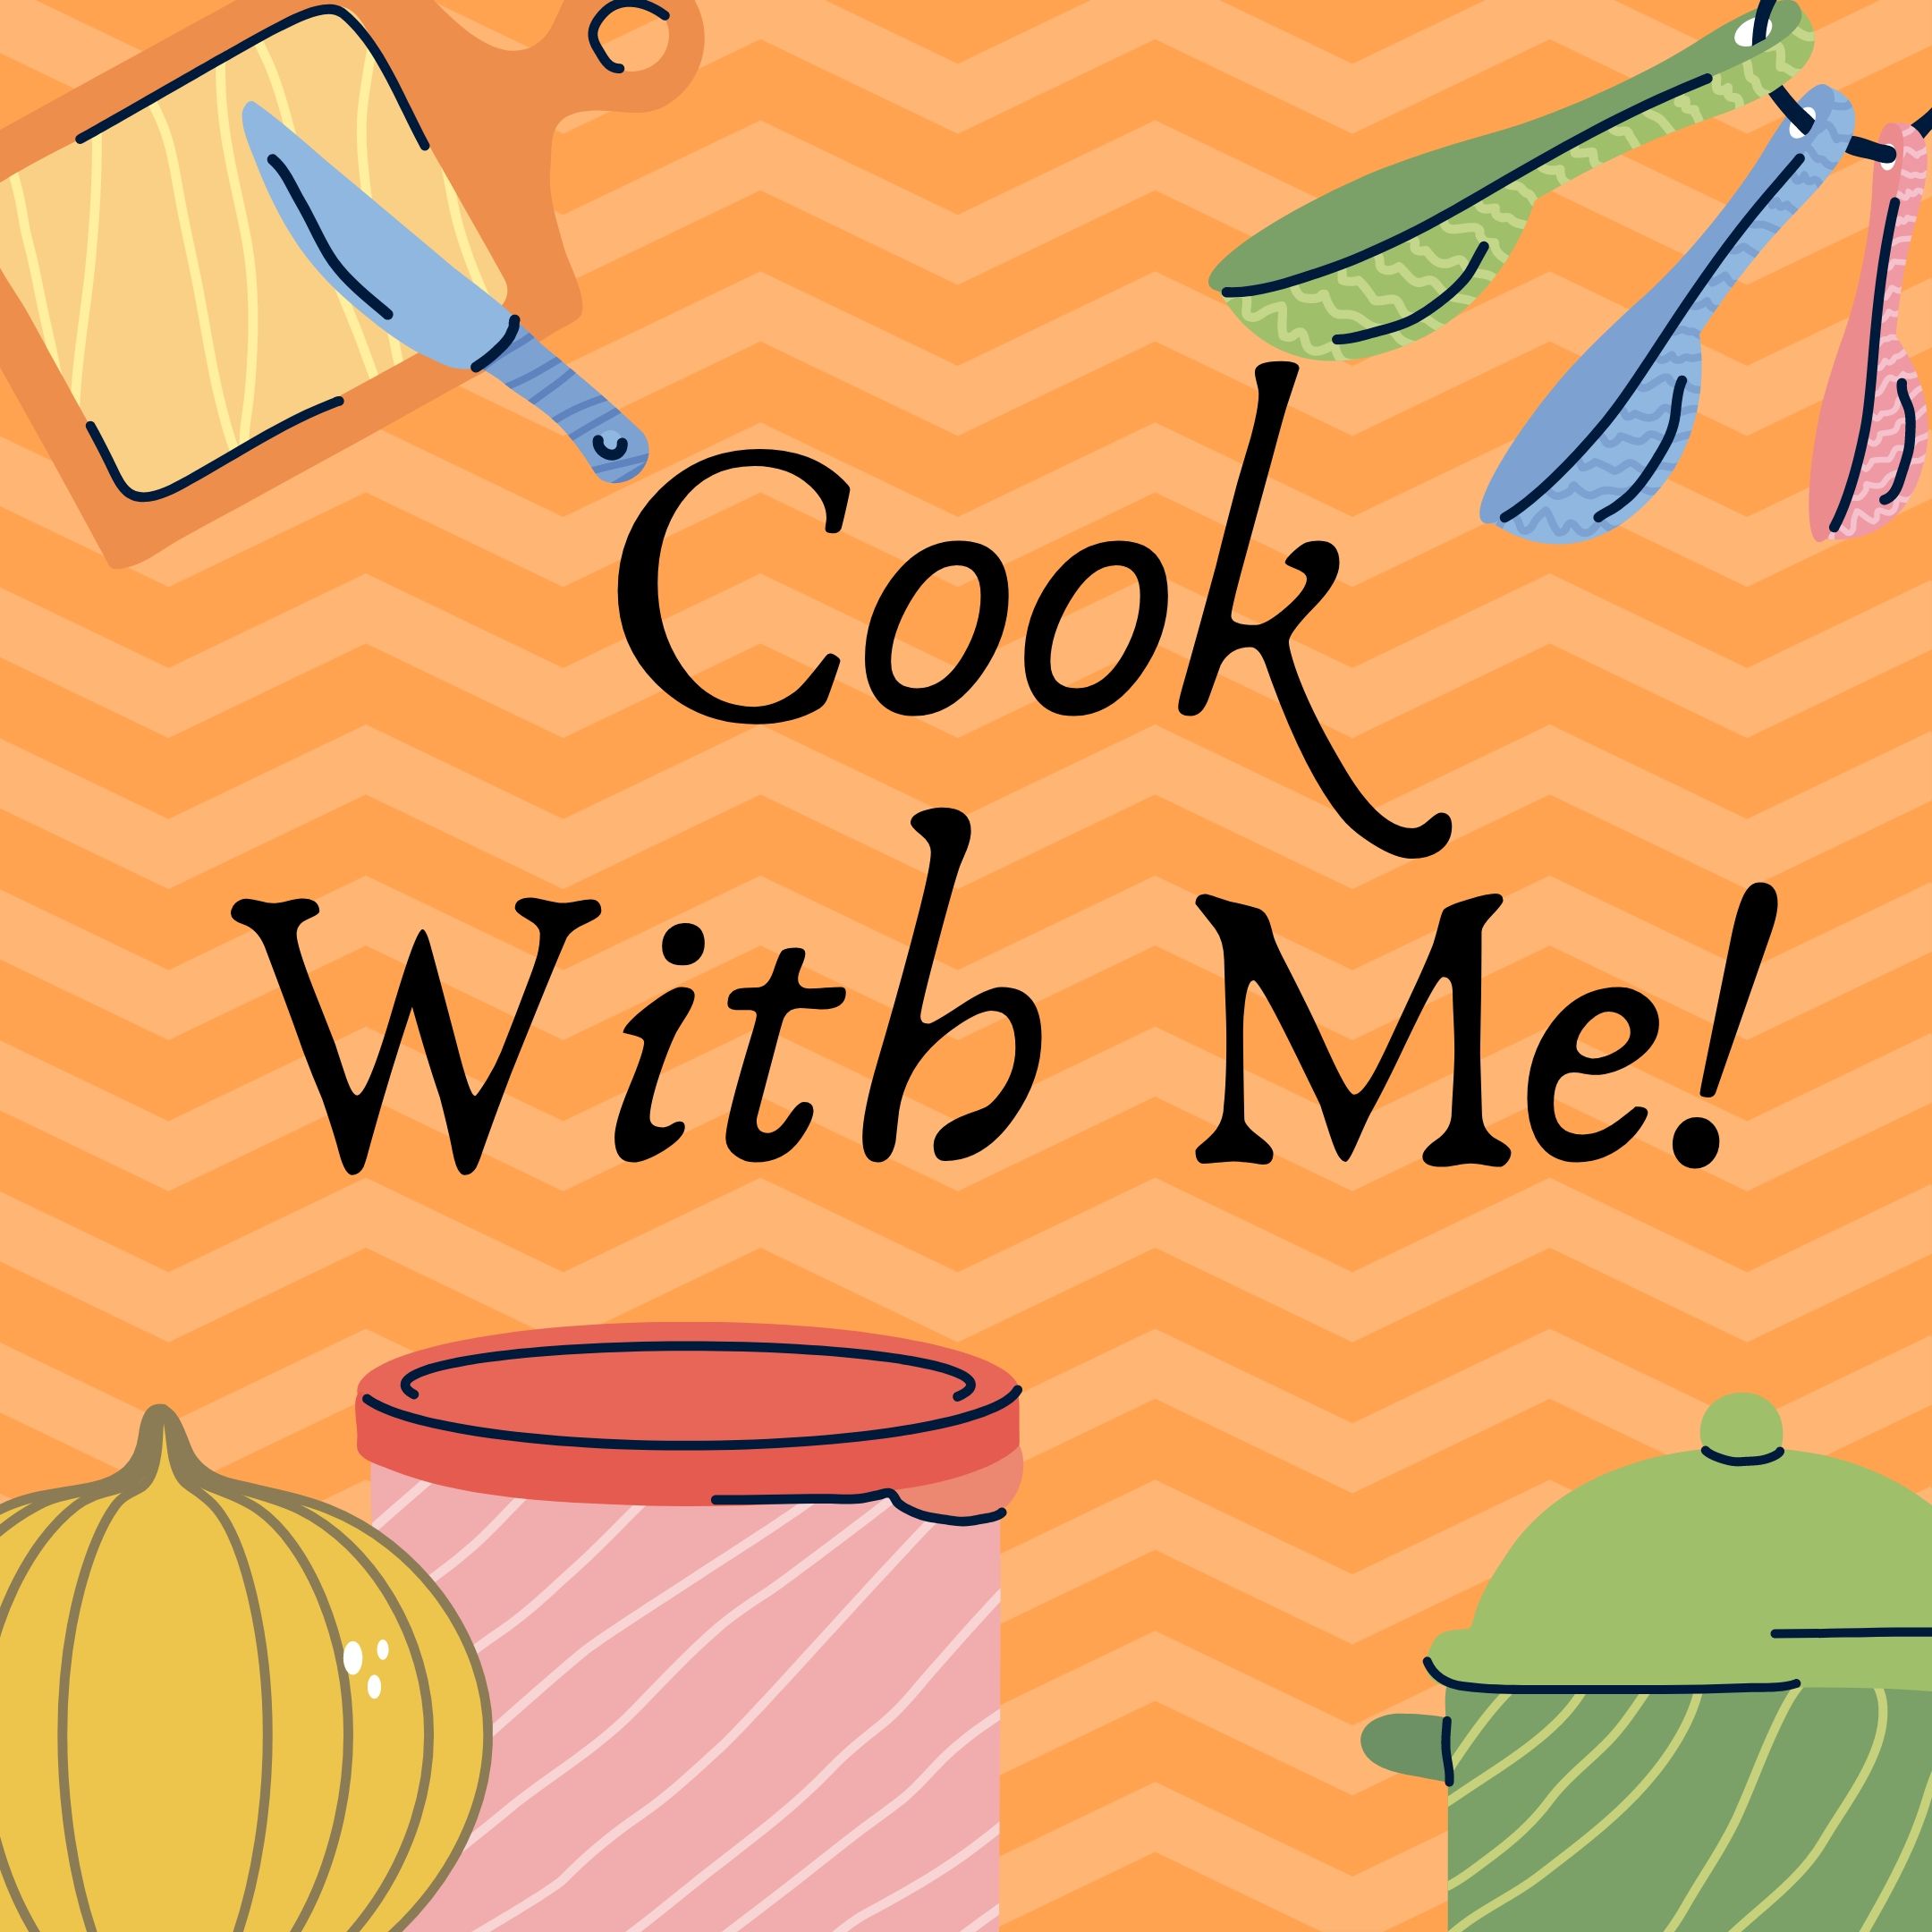 A cartoon image of cooking tools with the text "Cook With Me!"